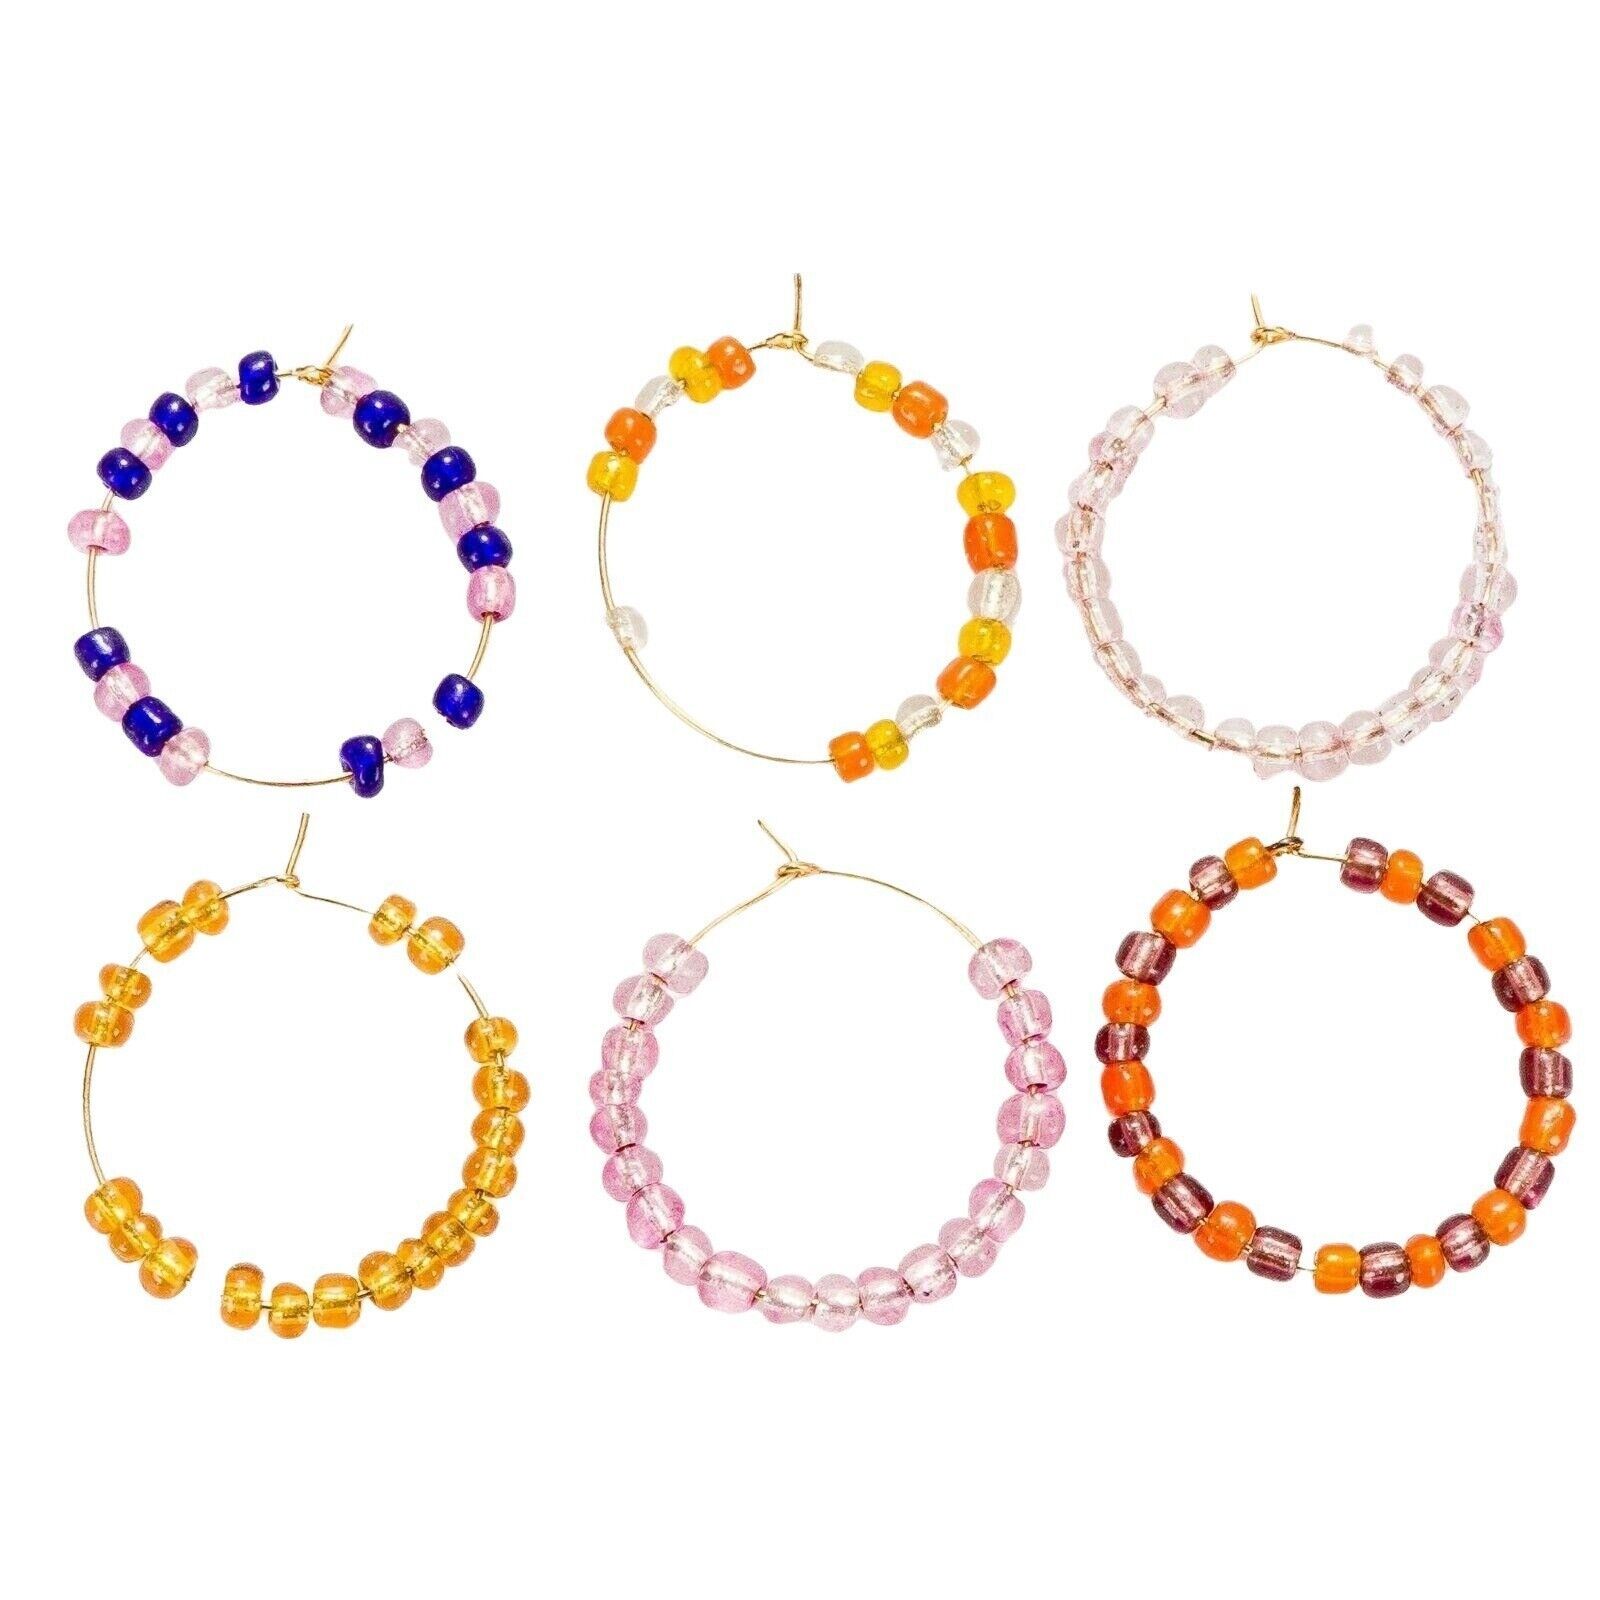 Wine Charms Set 6 Handmade Colorful Ball Beads Blue Red Yellow Pink White Orange - $7.78